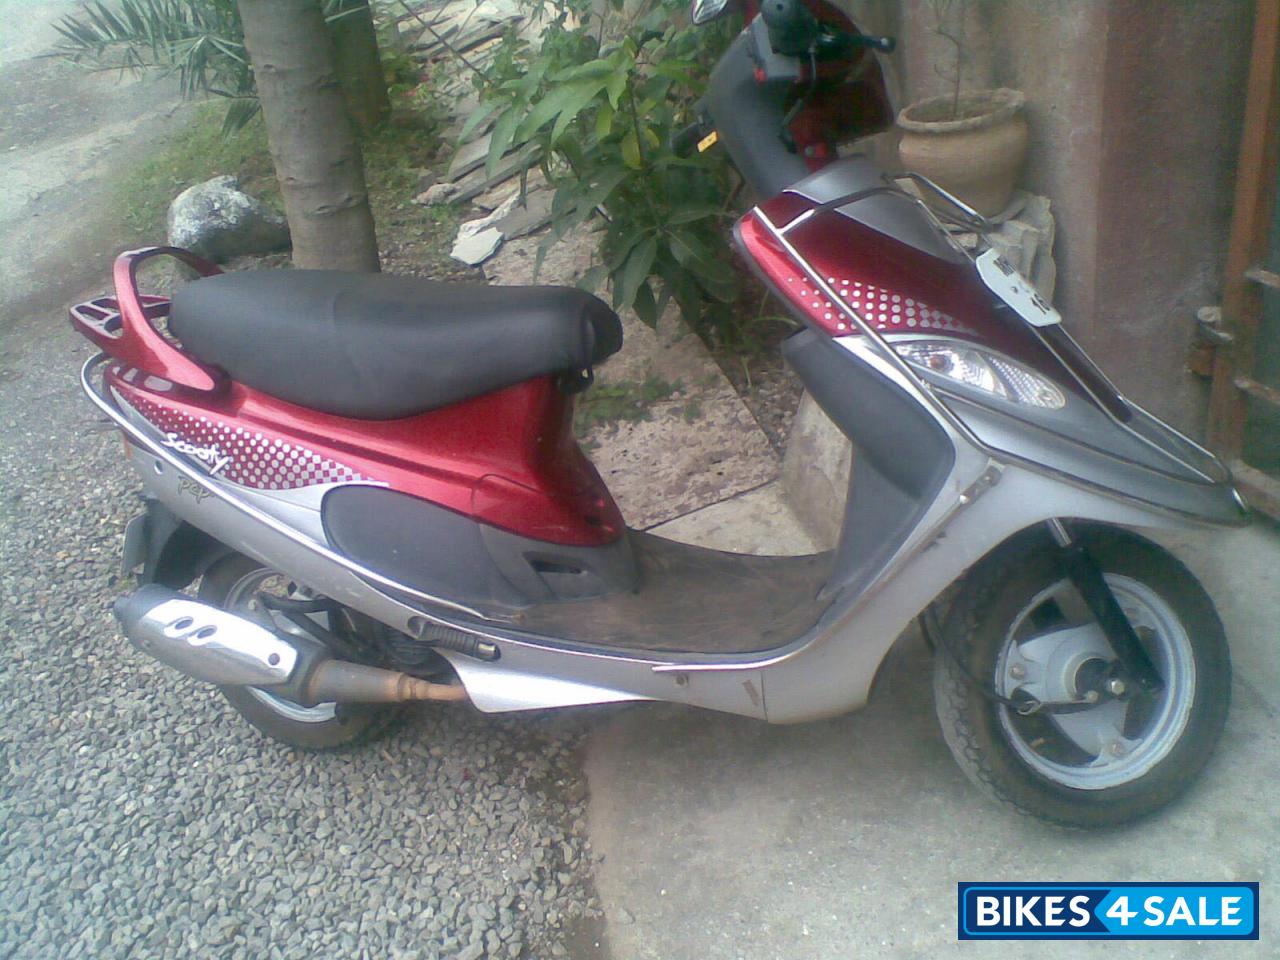 scooty pep red colour